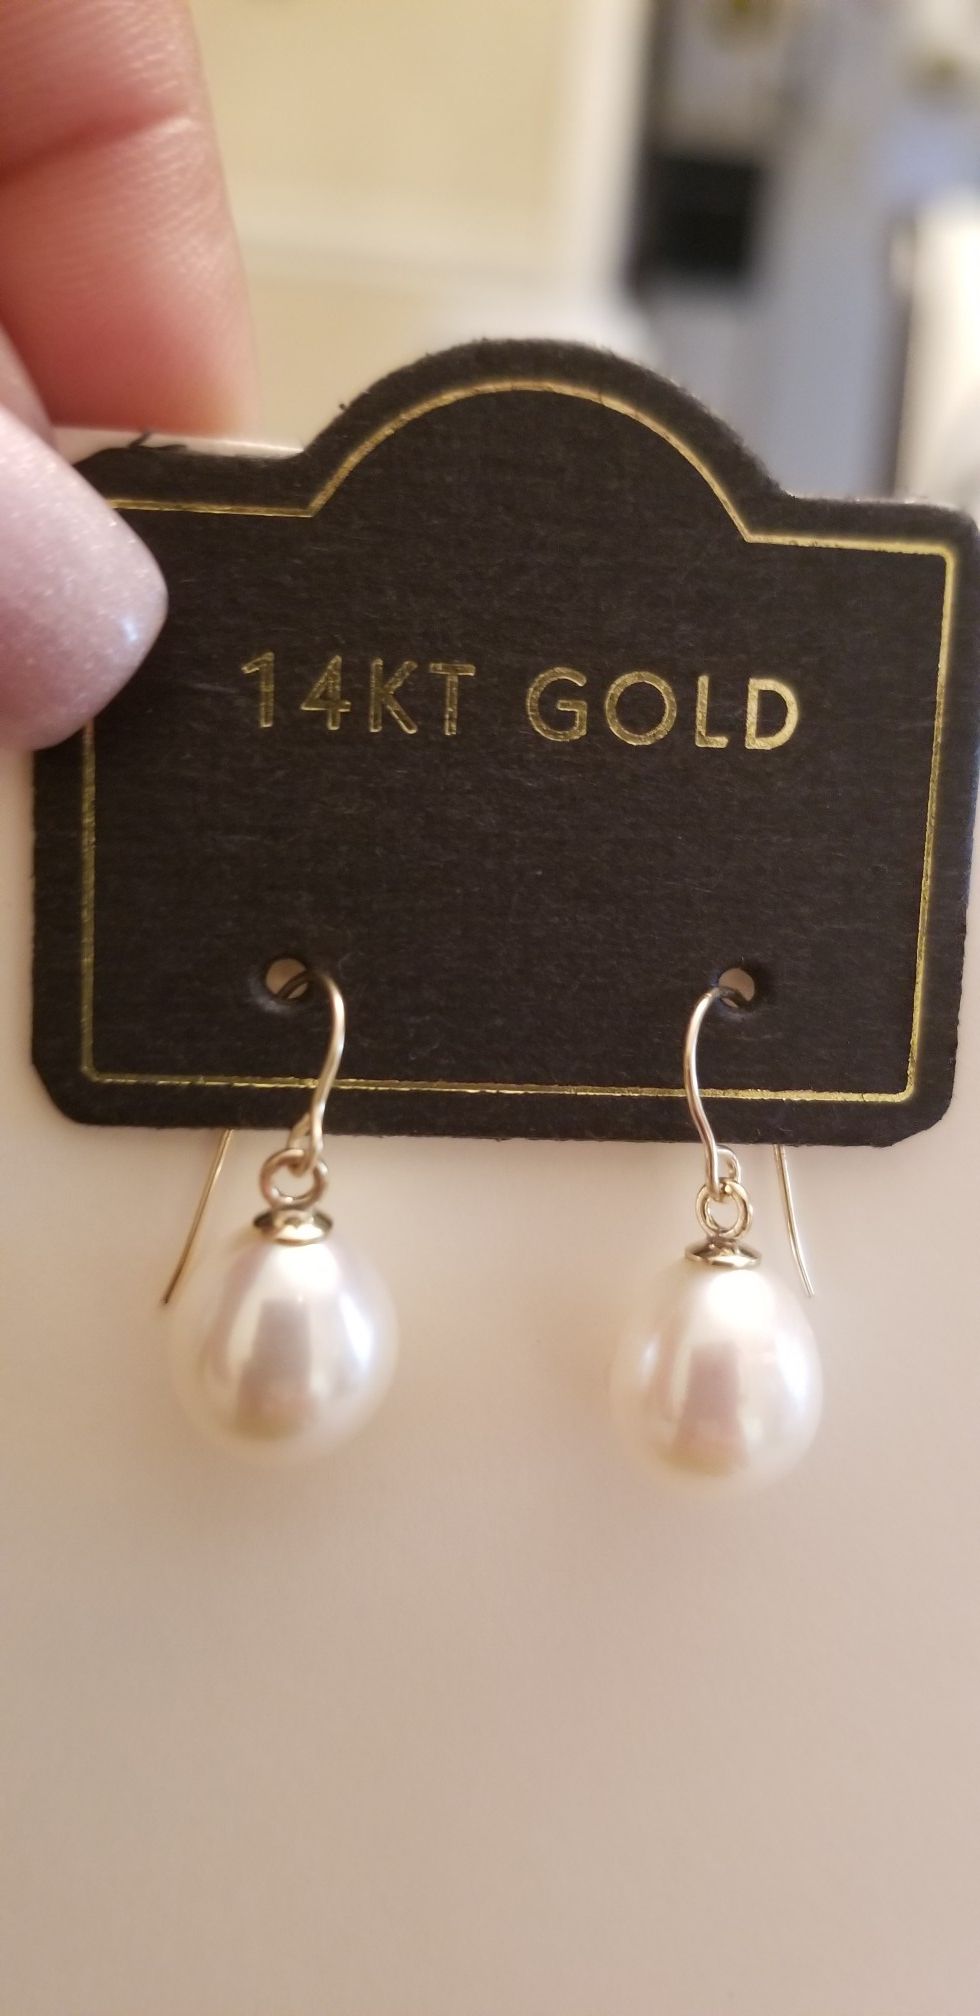 14kt gold 10mm natural pearls earrings